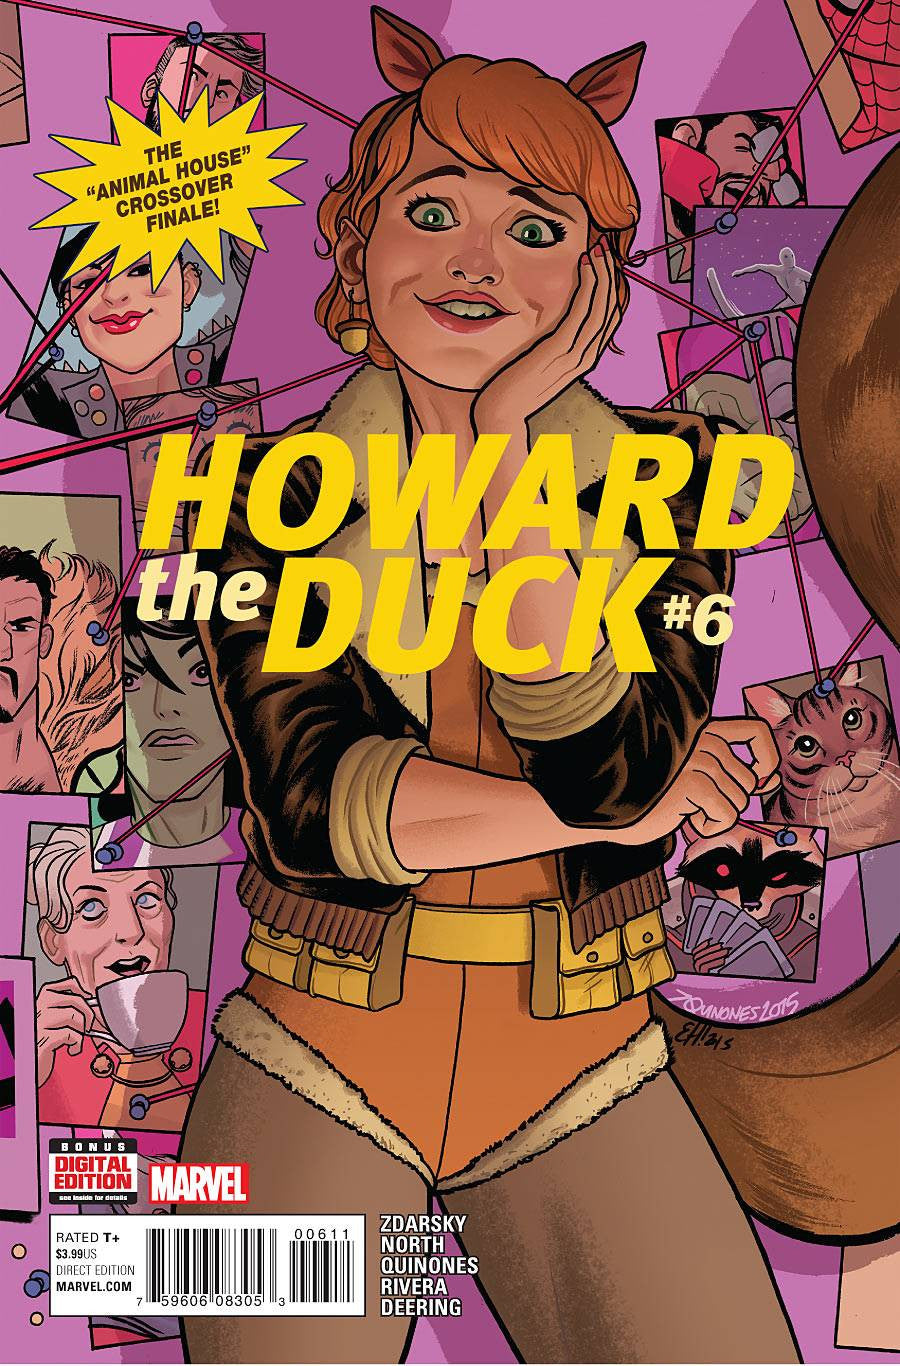 HOWARD THE DUCK #6 COVER